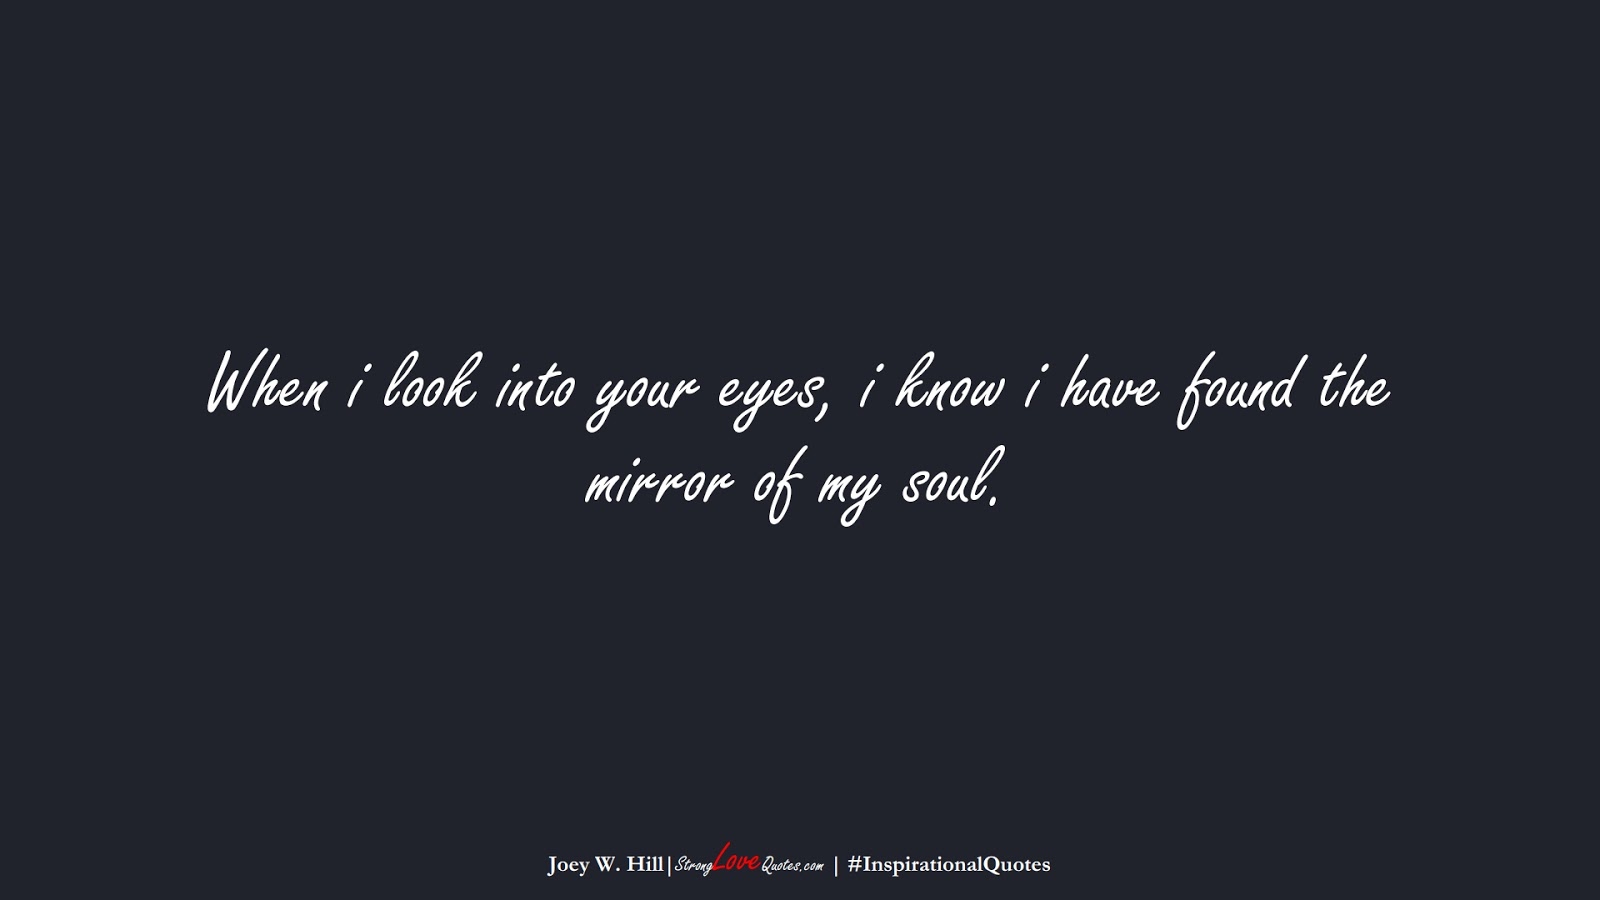 When i look into your eyes, i know i have found the mirror of my soul. (Joey W. Hill);  #InspirationalQuotes